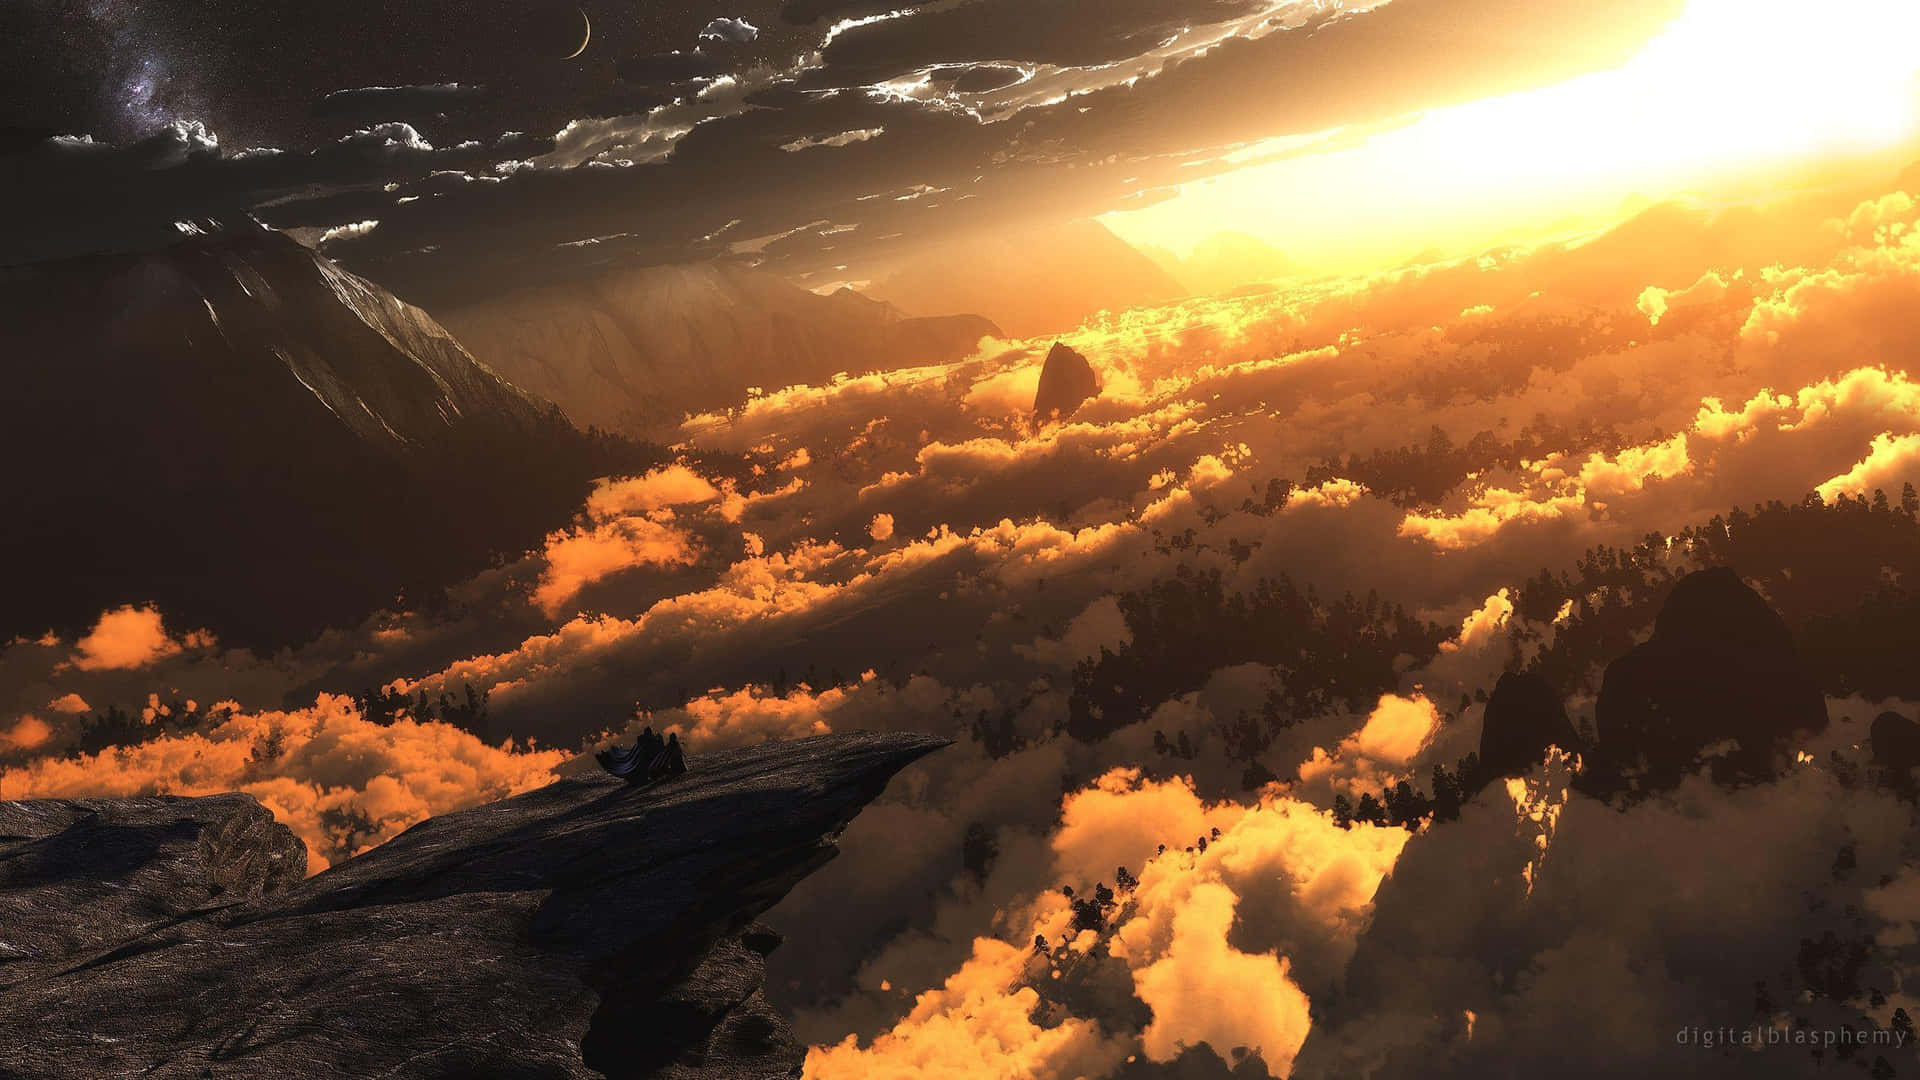 A Beautiful Image Of The Sun Rising Over A Mountain